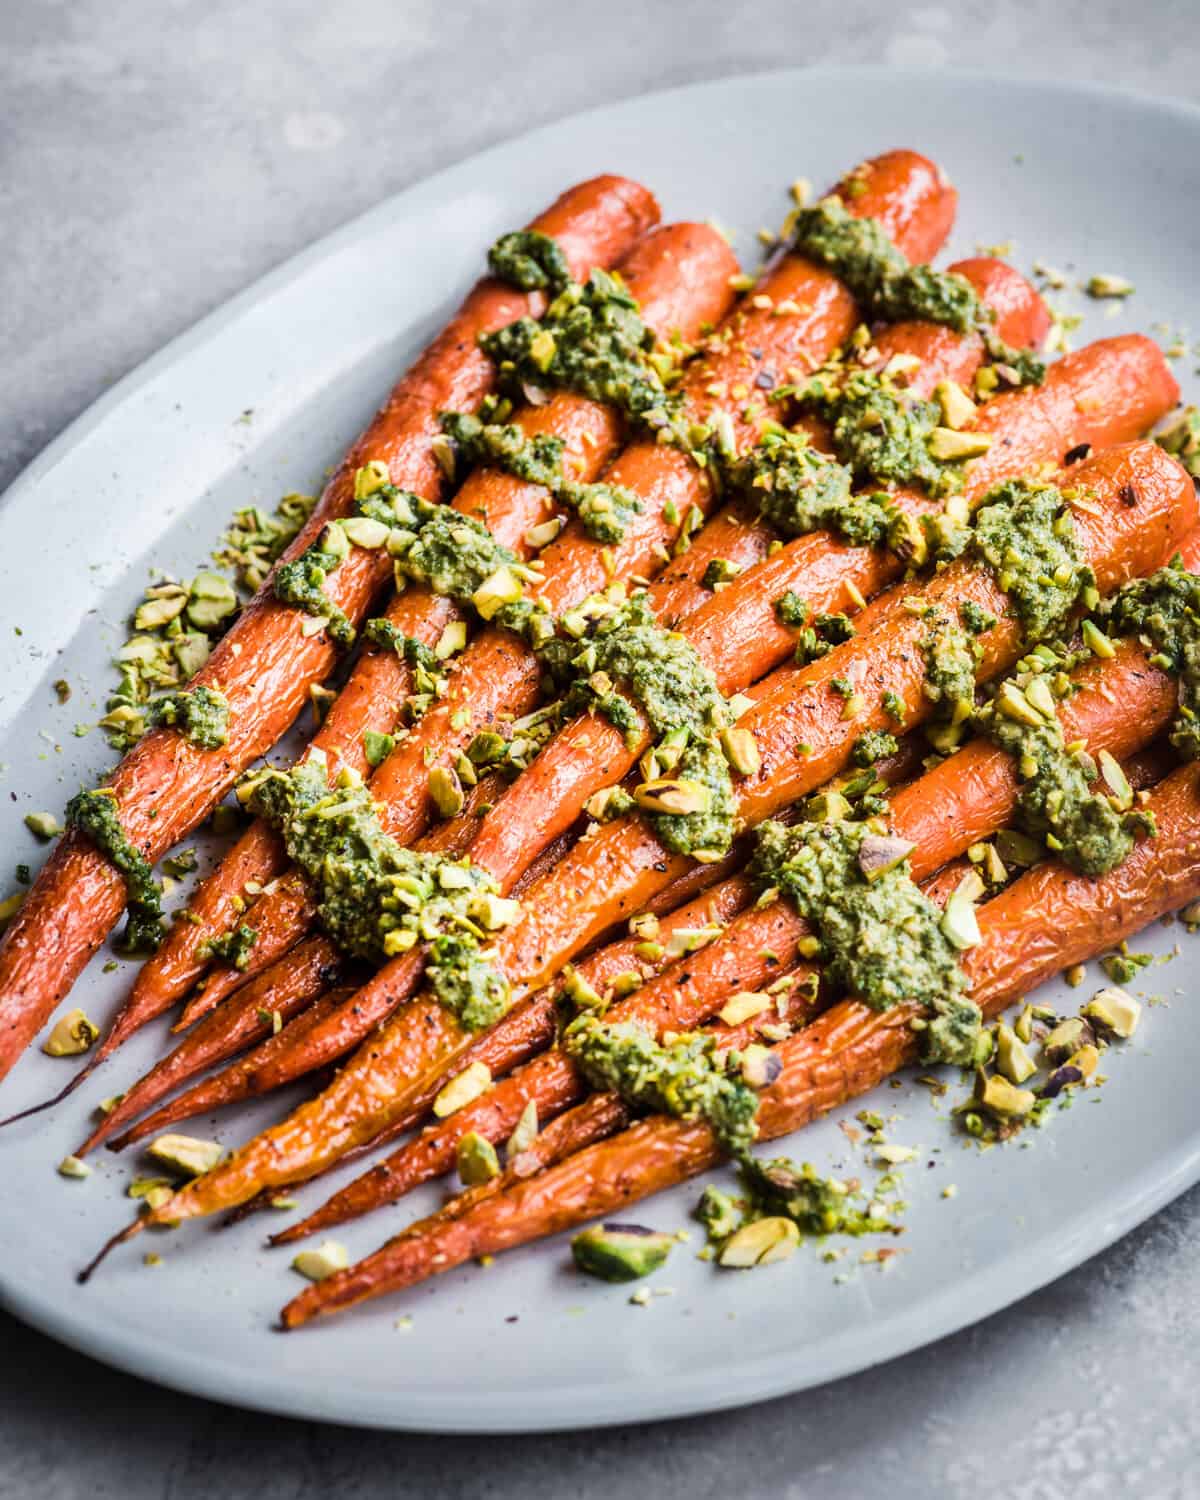 Carrots covered in carrot top pesto on a white platter on a grey table.